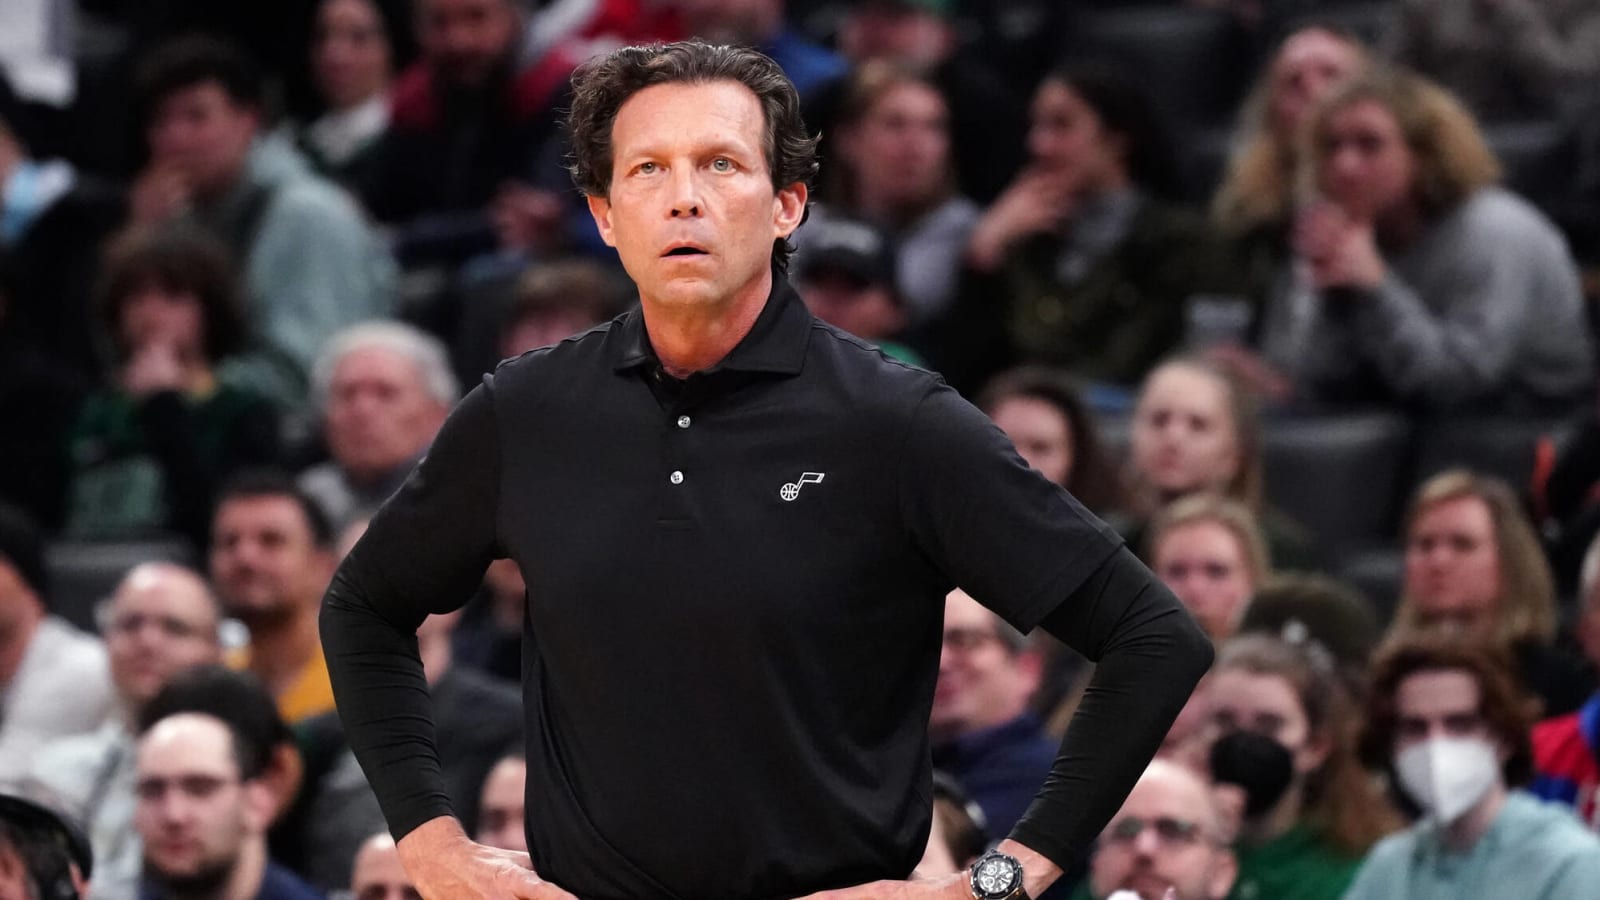 Utah Jazz coach Quin Snyder on verge of stepping down 